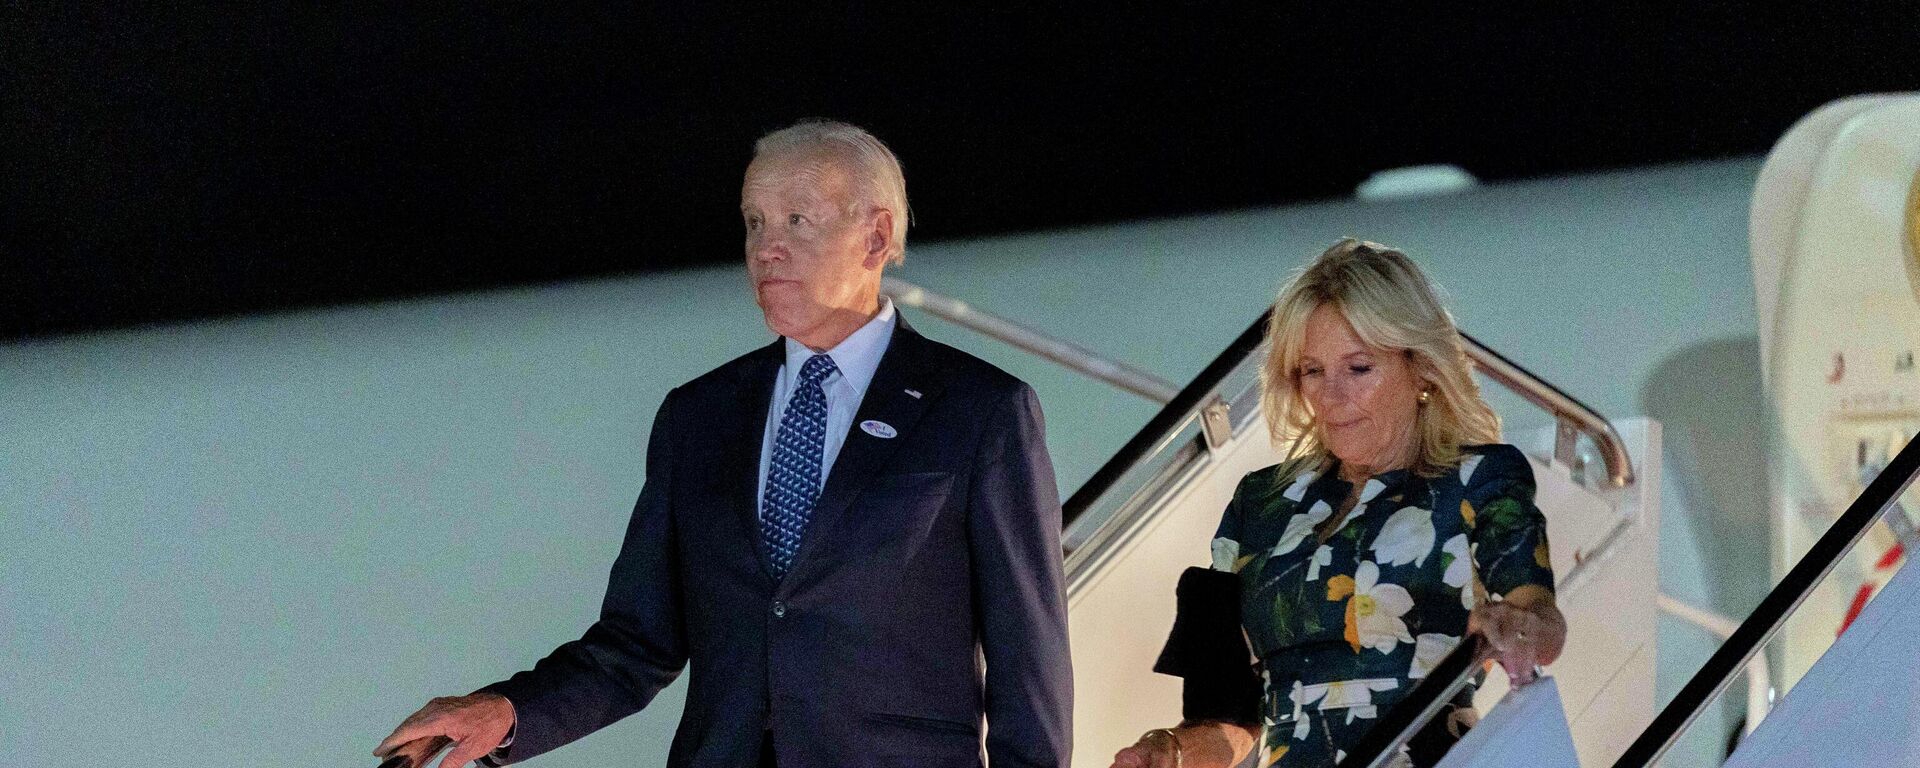 President Joe Biden and first lady Jill Biden arrive at Andrews Air Force Base, Md., Tuesday, Sept. 13, 2022, after voting in the Delaware primary. - Sputnik International, 1920, 15.09.2022